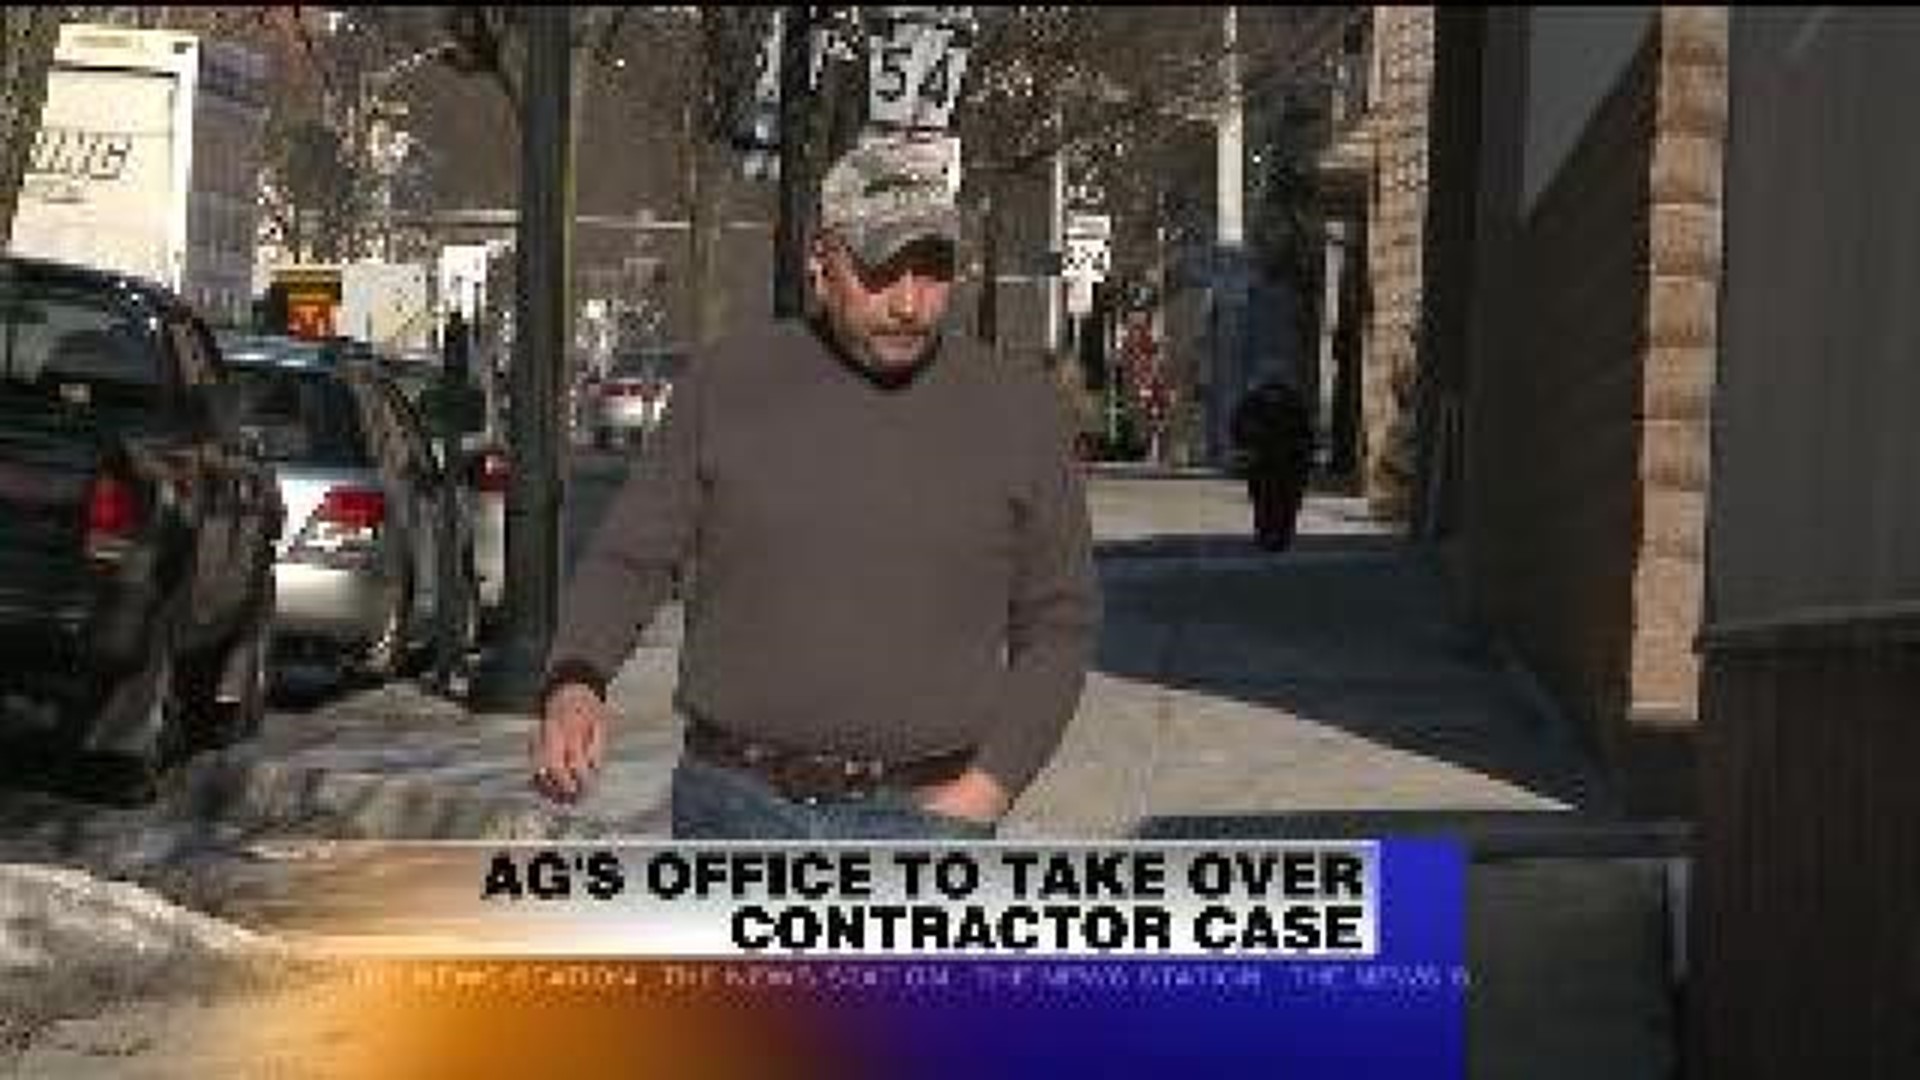 State AG to Take Over Contractor Case